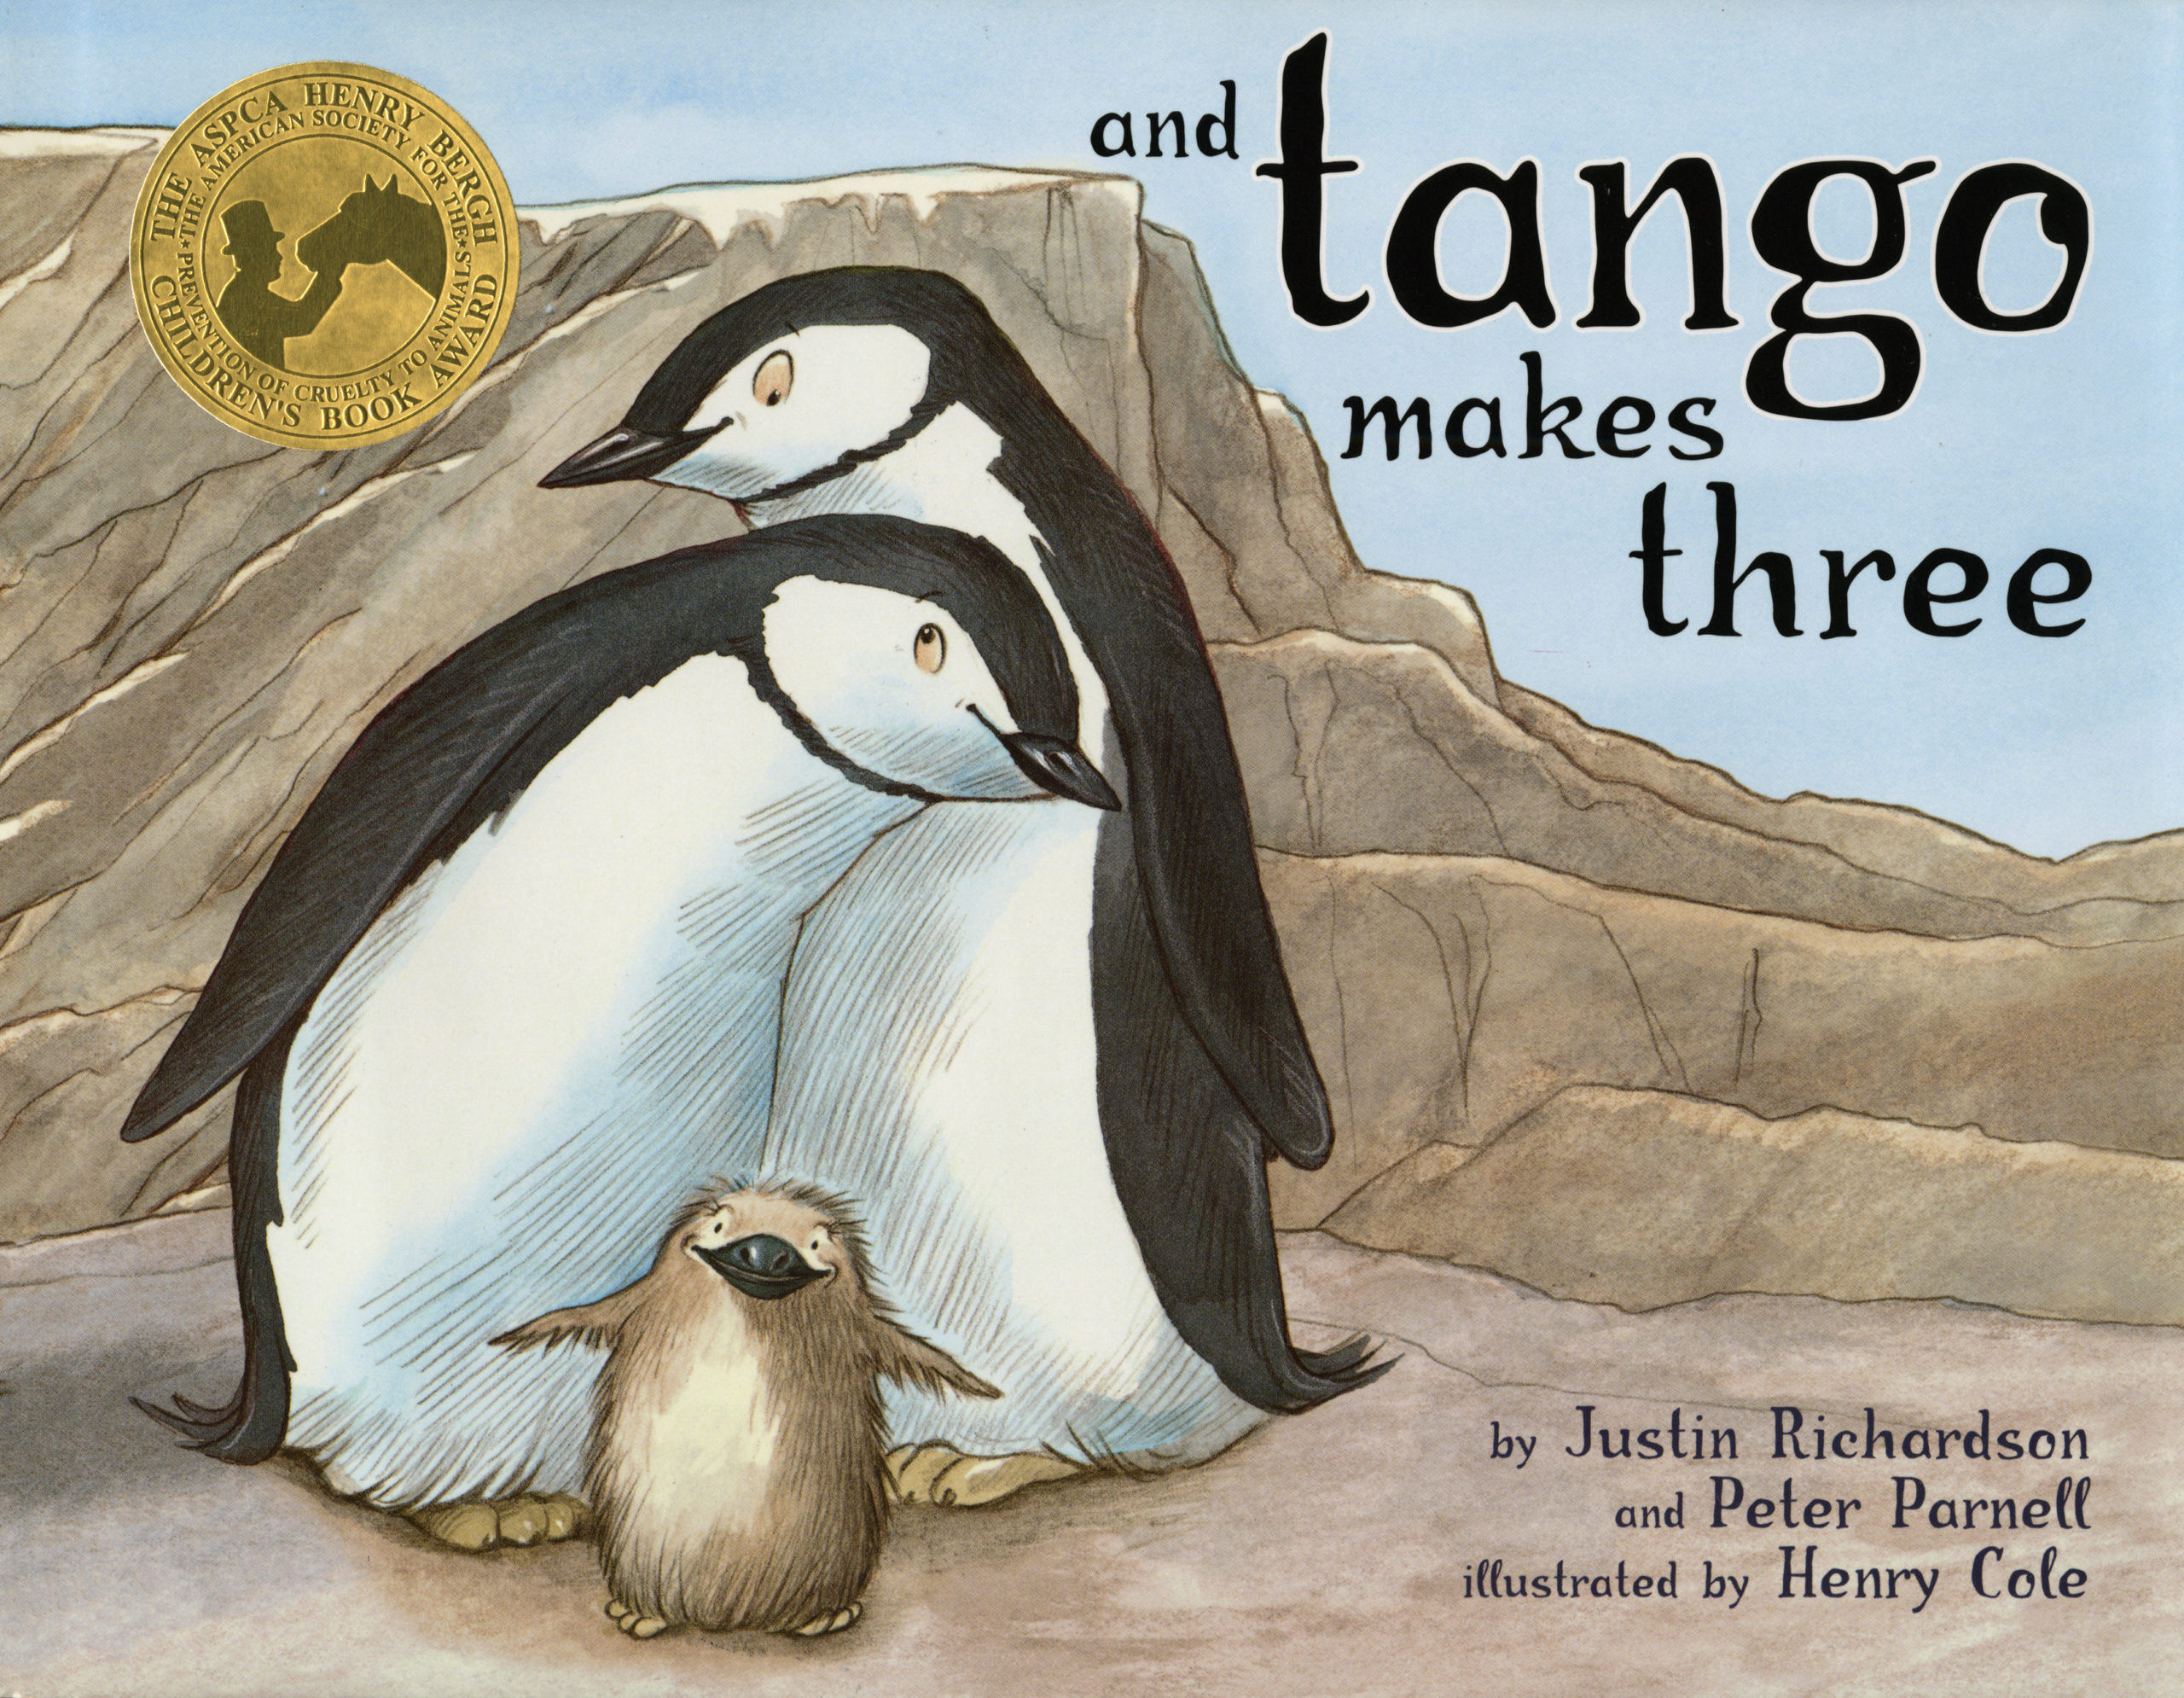 Interview with And Tango Makes Three Authors